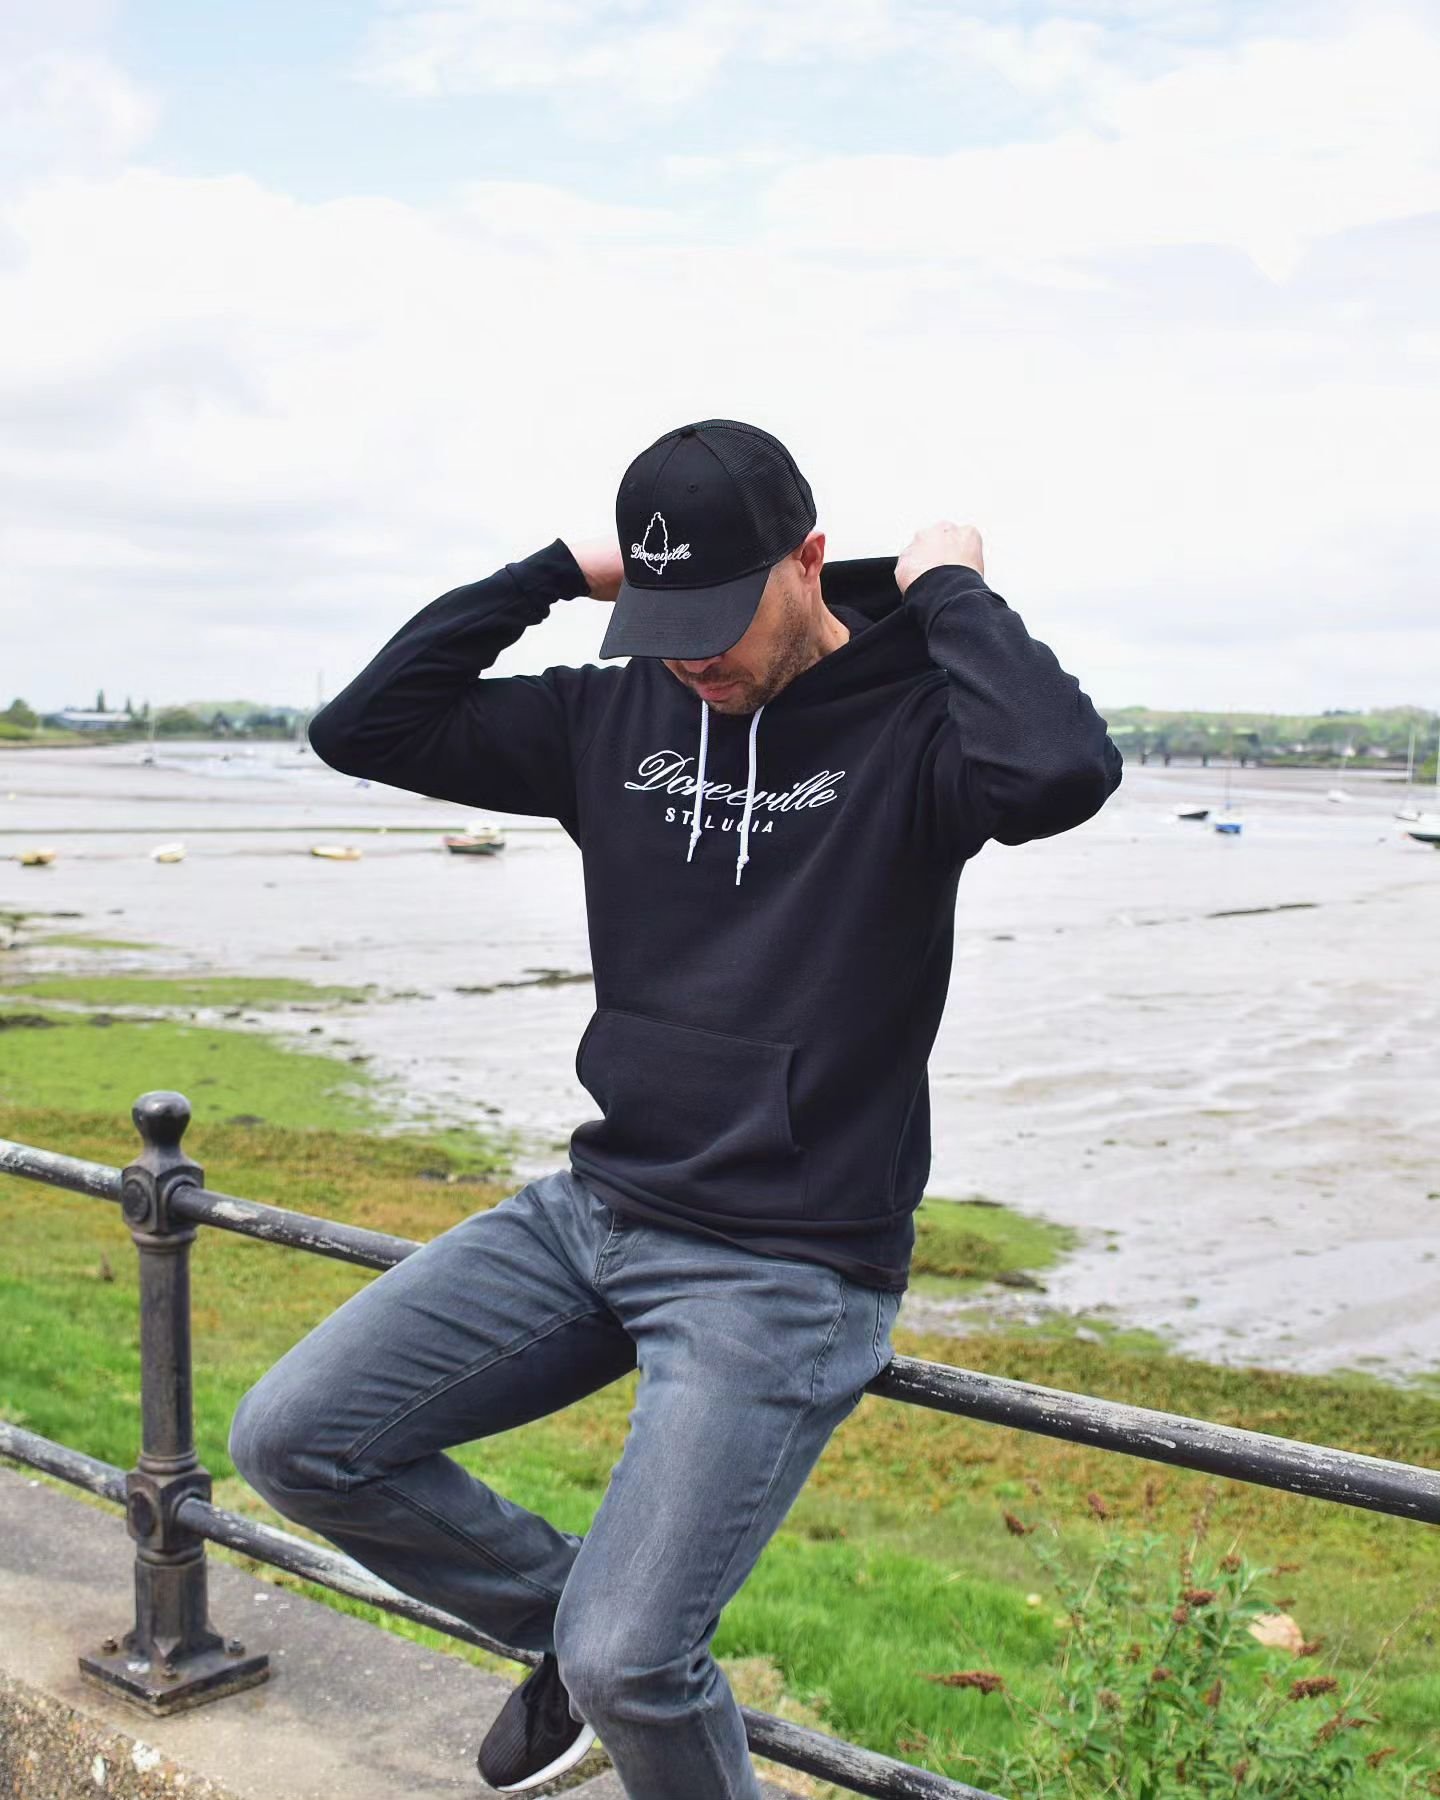 It's cold, wet and miserable. Our UNISEX hoodie is ideal for snuggling up and getting comfy on the sofa. It's lightweight soft and comfortable. Well so we've been told! 
Shop yours online at wwe.doreevilleapparel.com
.
.
.
#Doreeville #apparel #hoodi